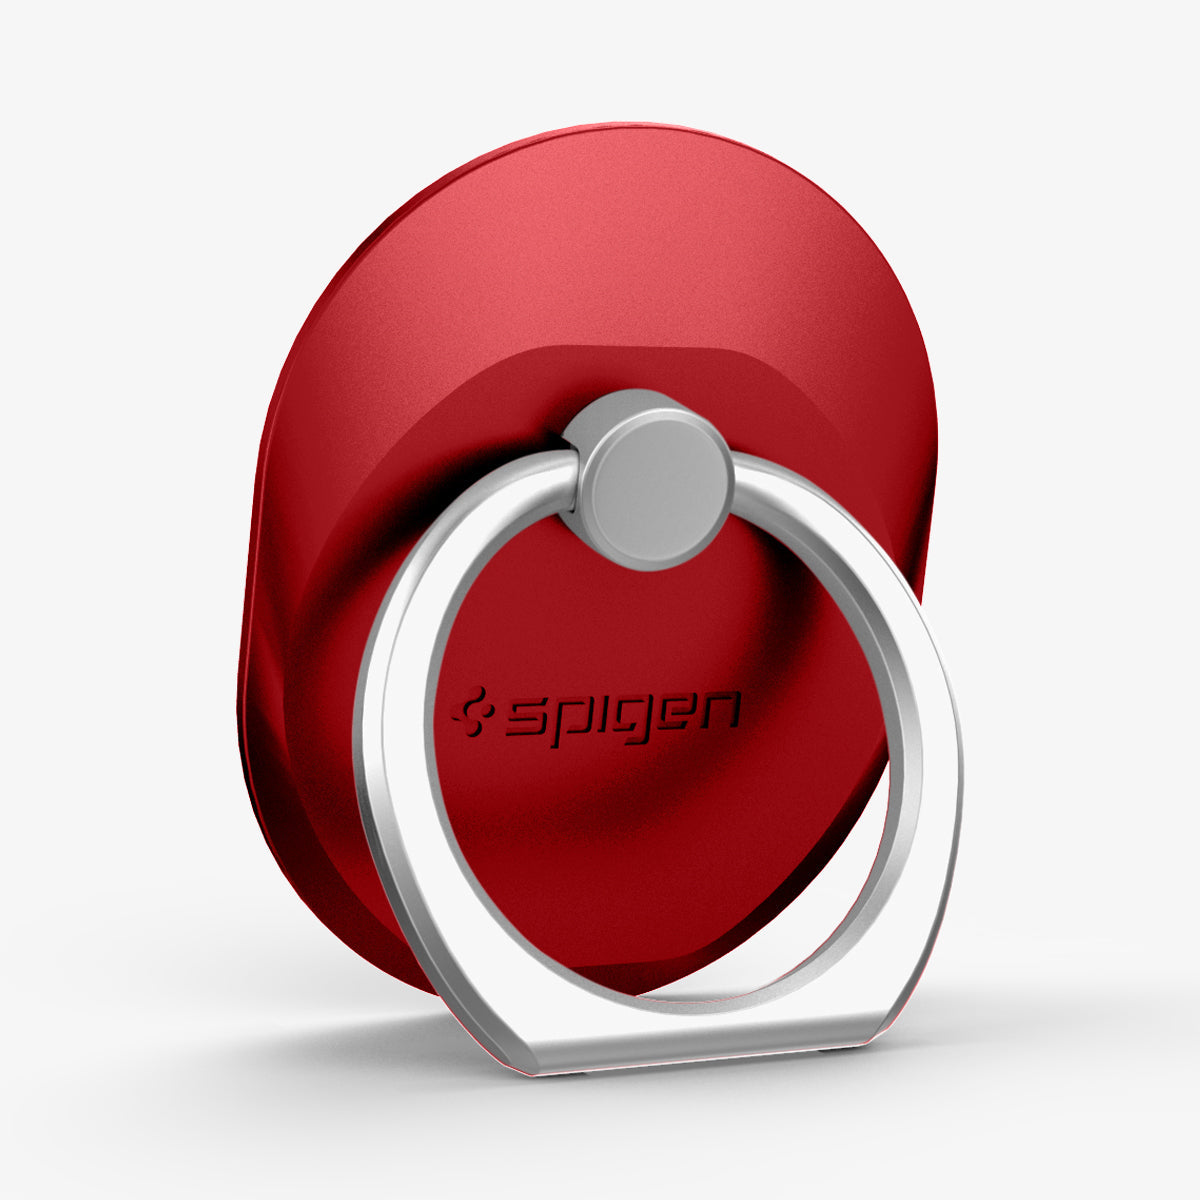 000SR21950 - Style Ring in red showing the front and partial side